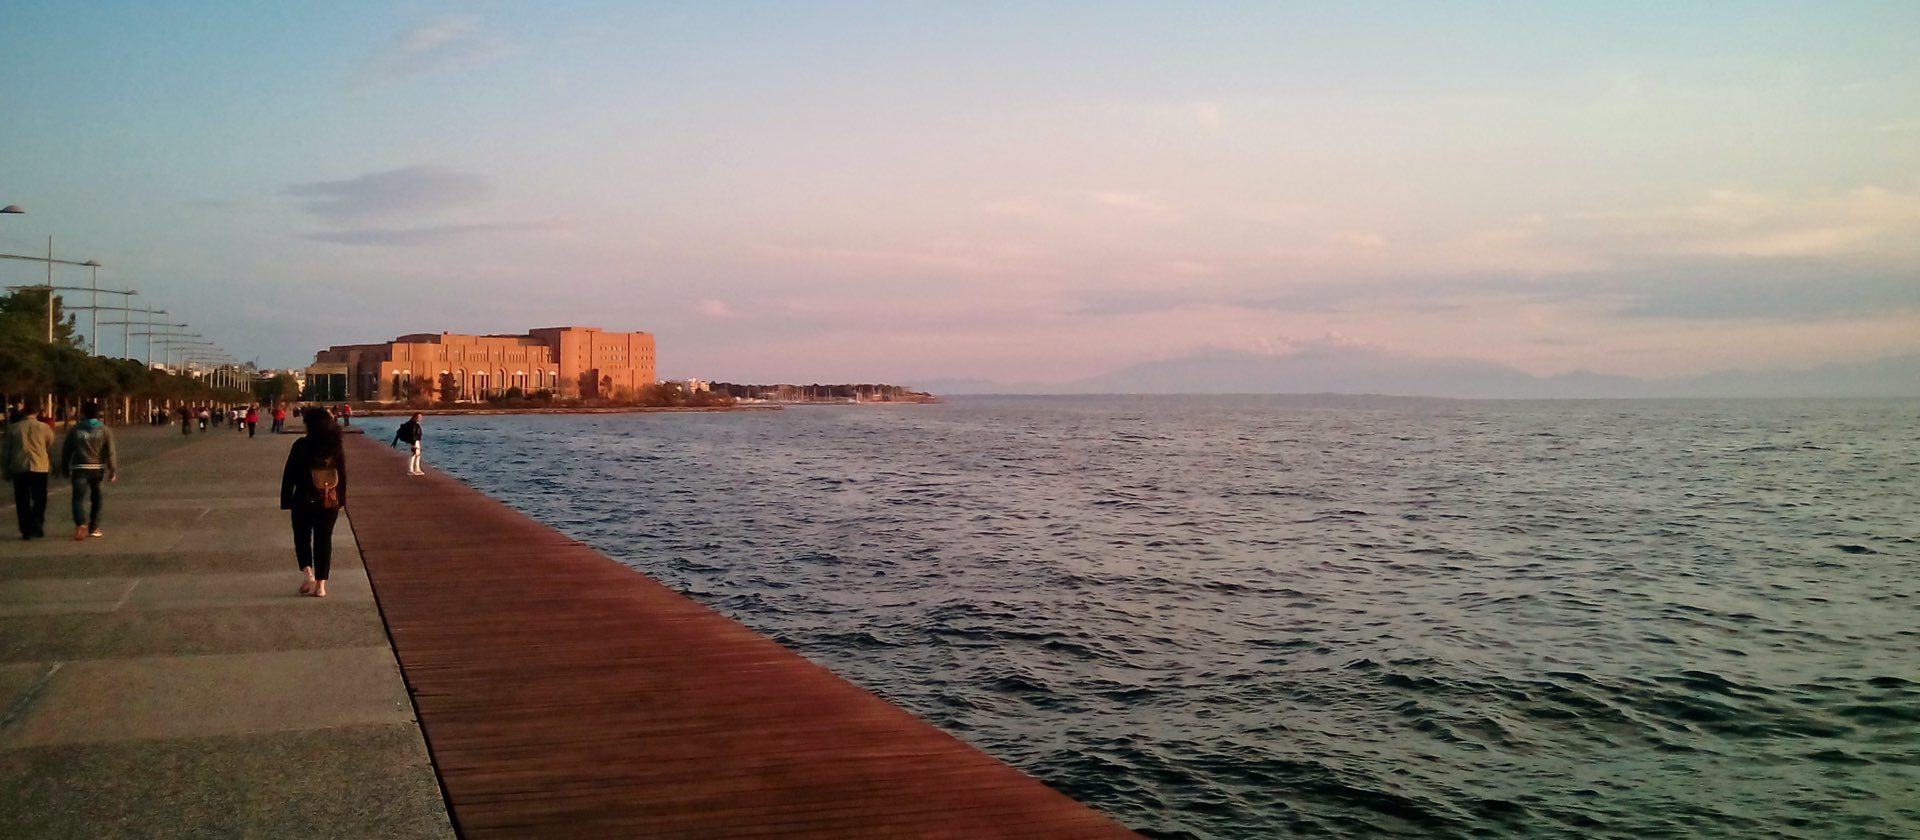 The sea of Thessaloniki with the Concert Hall in the background